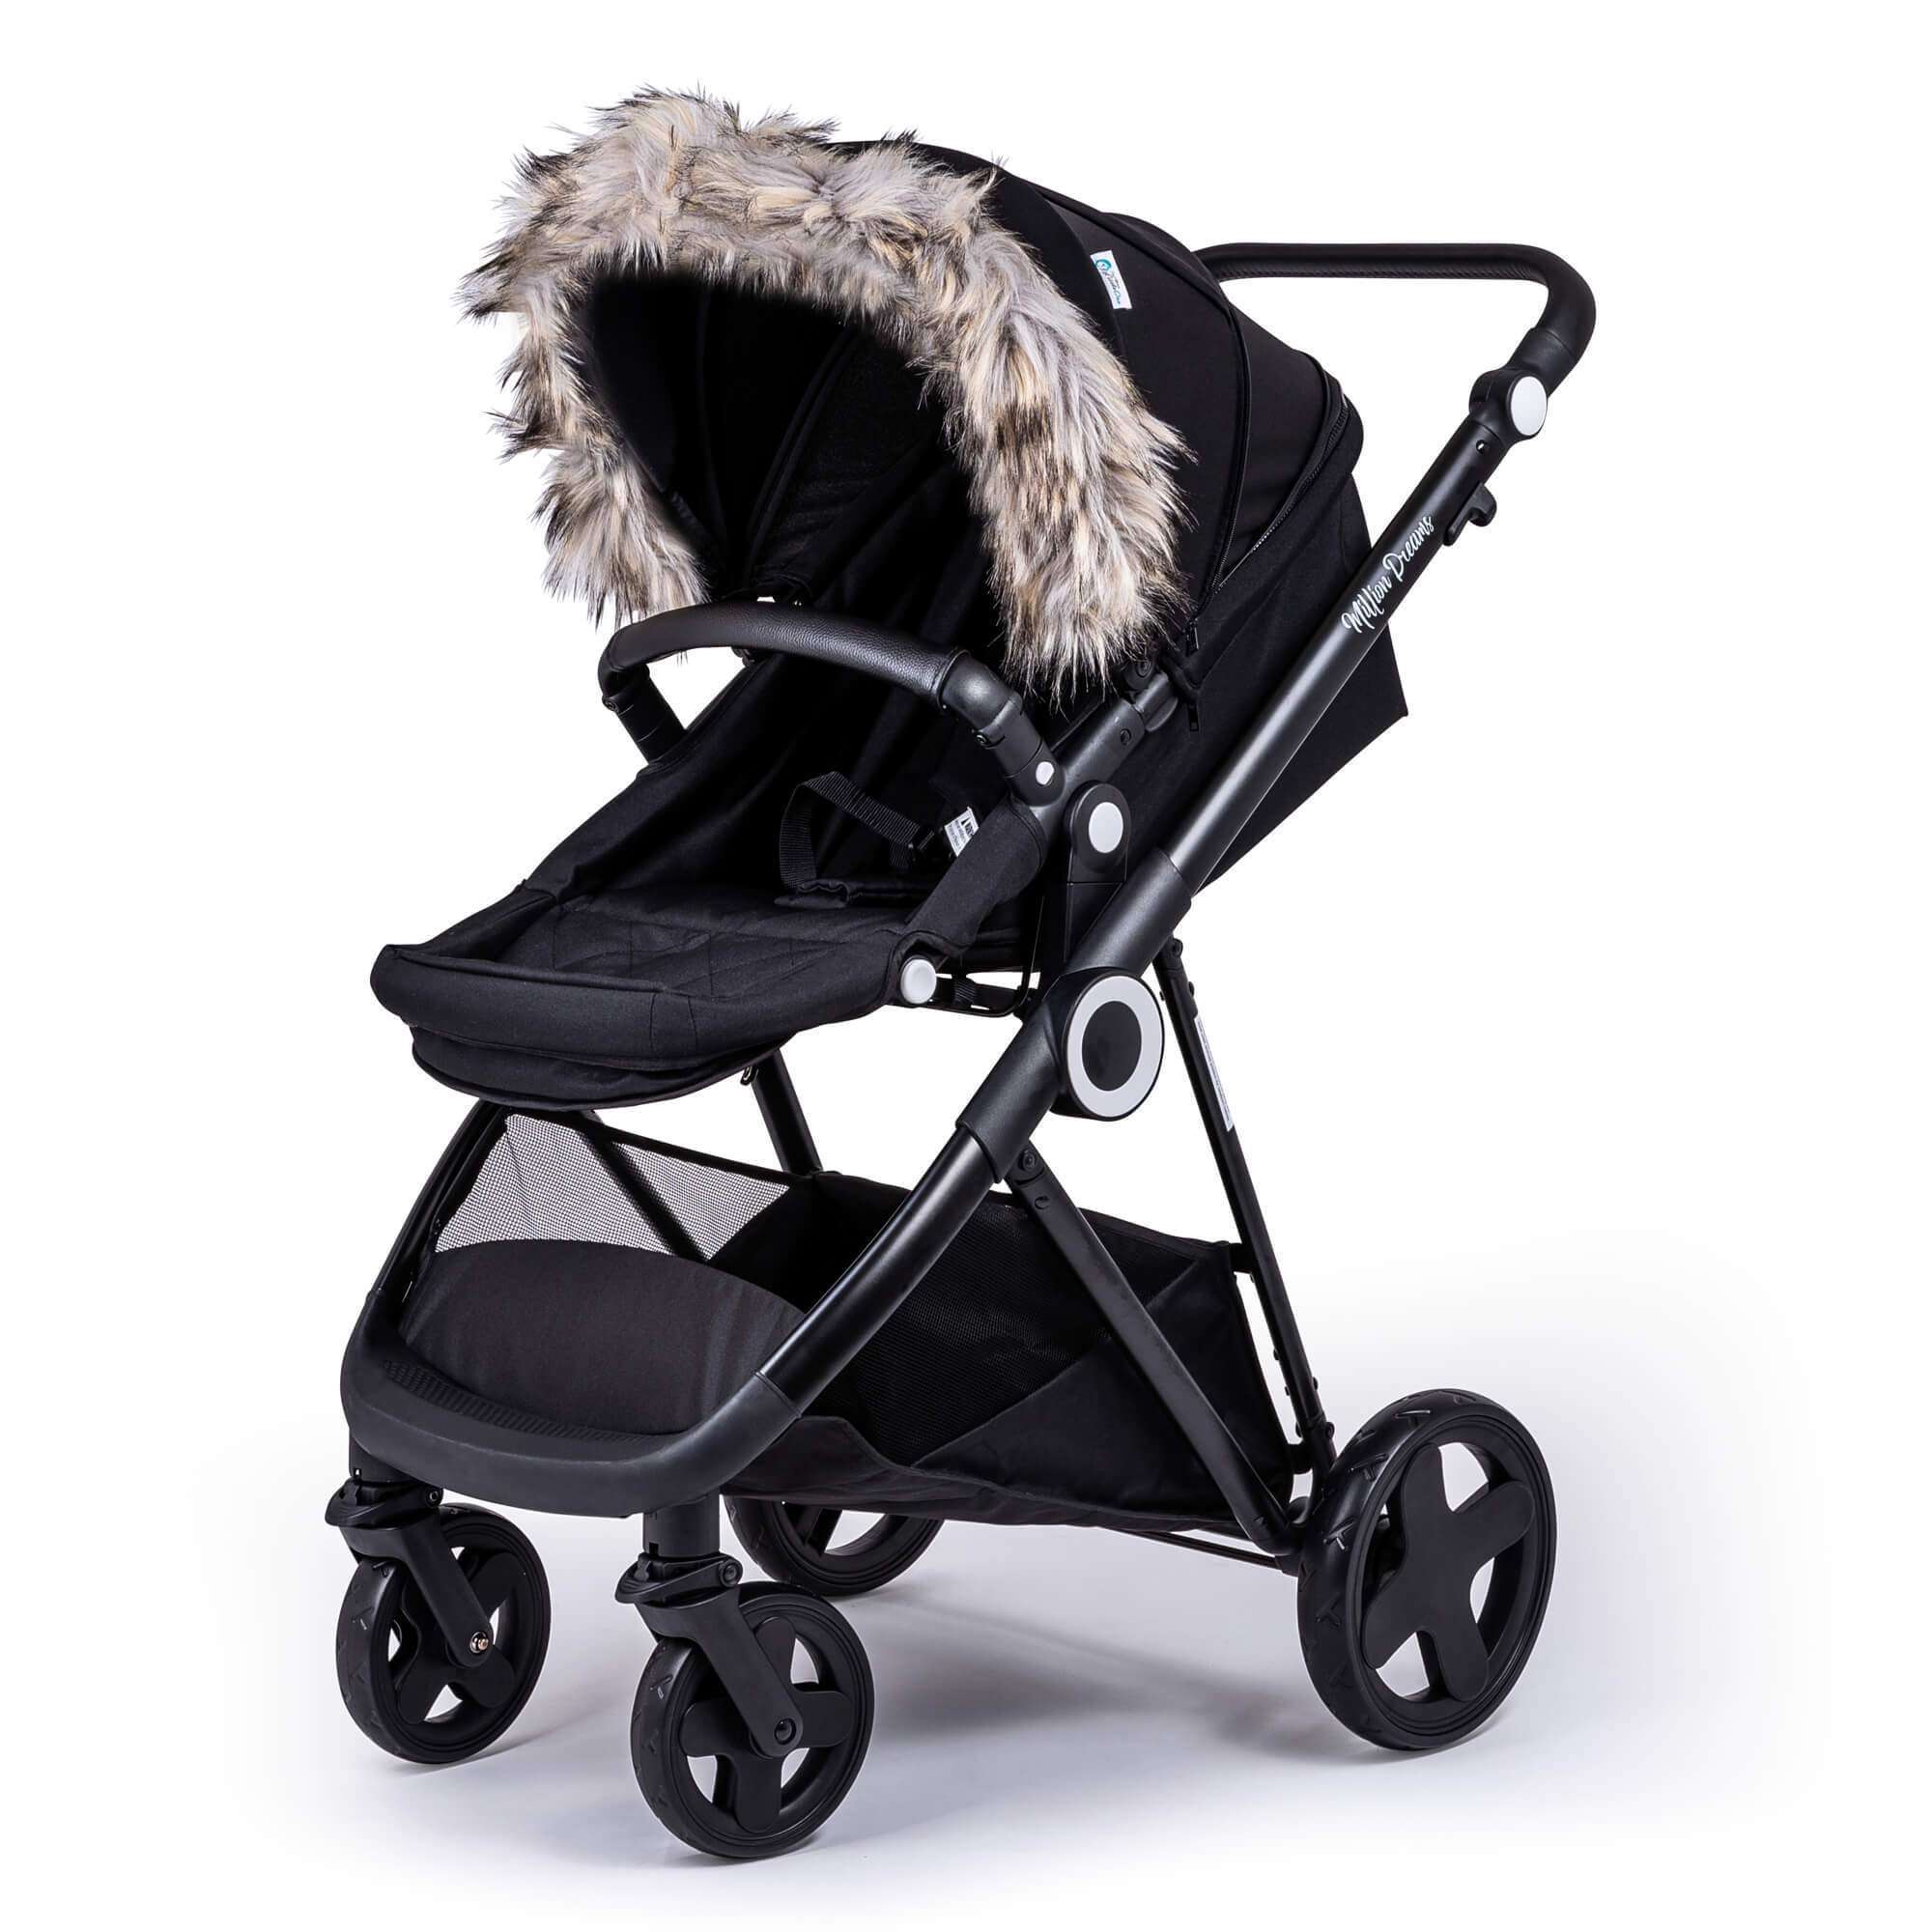 Pram Fur Hood Trim Attachment for Pushchair Compatible with Phil & Teds - Light Grey / Fits All Models | For Your Little One